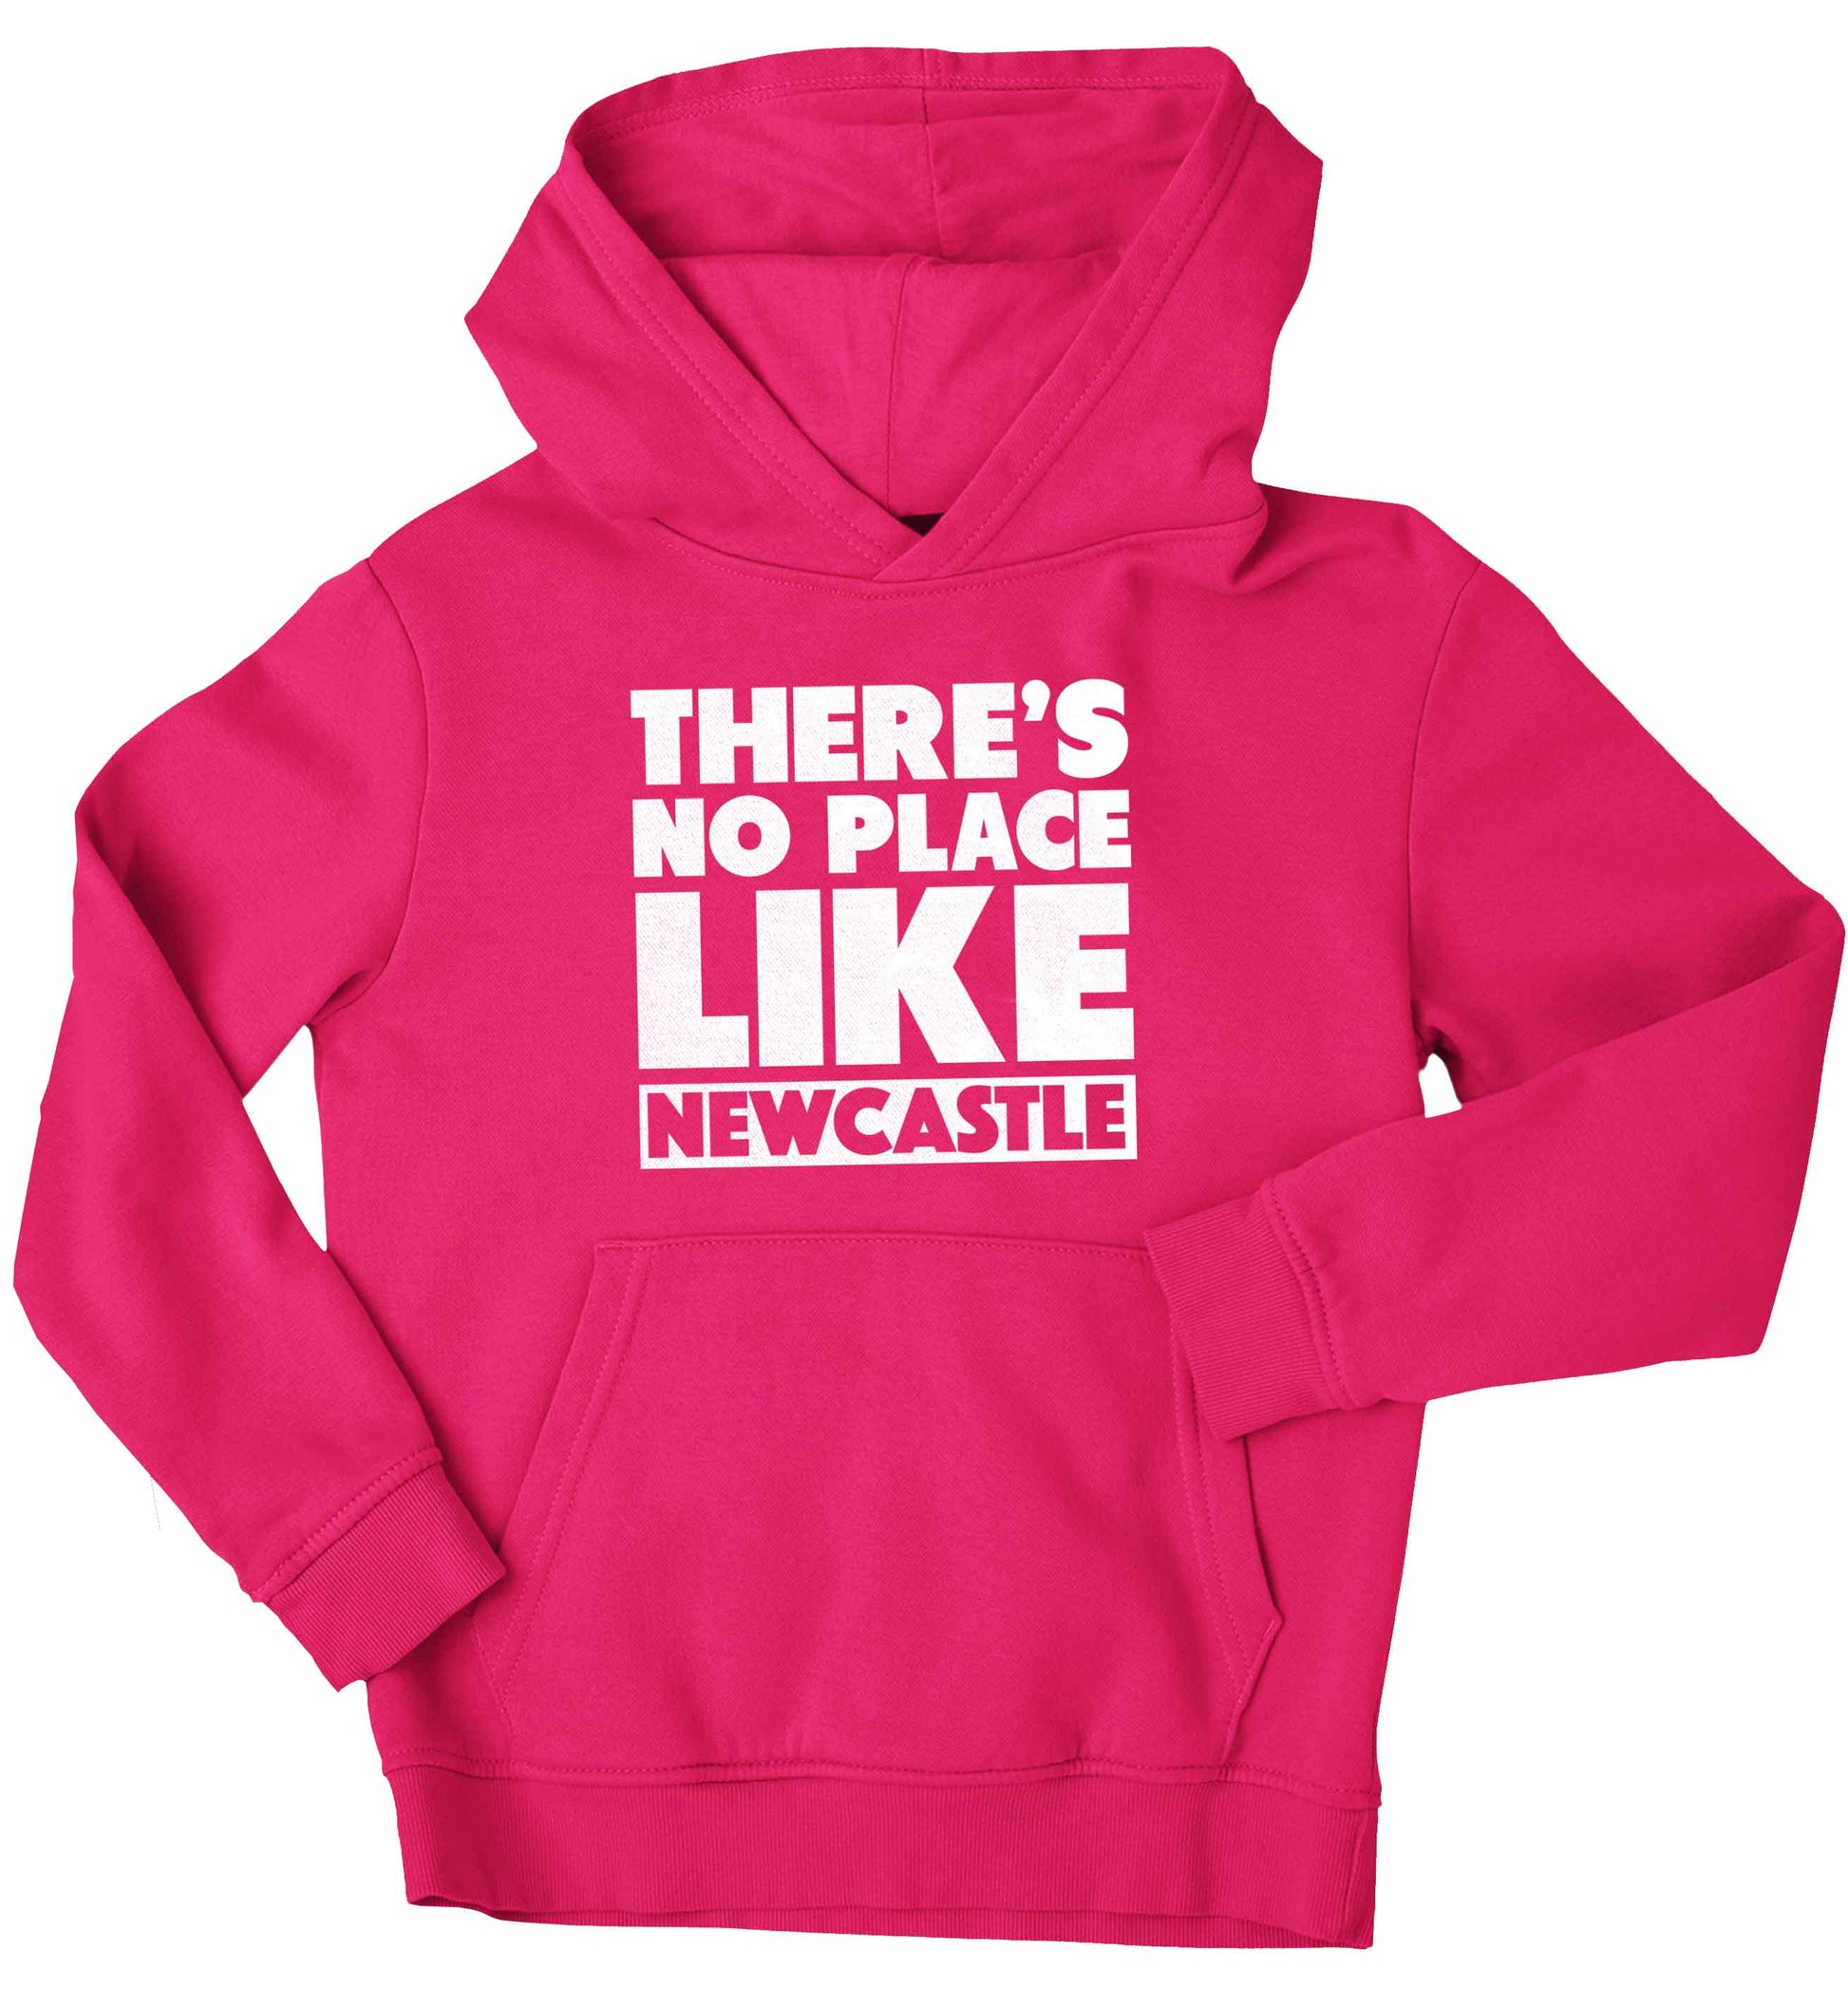 There's no place like Newcastle children's pink hoodie 12-13 Years